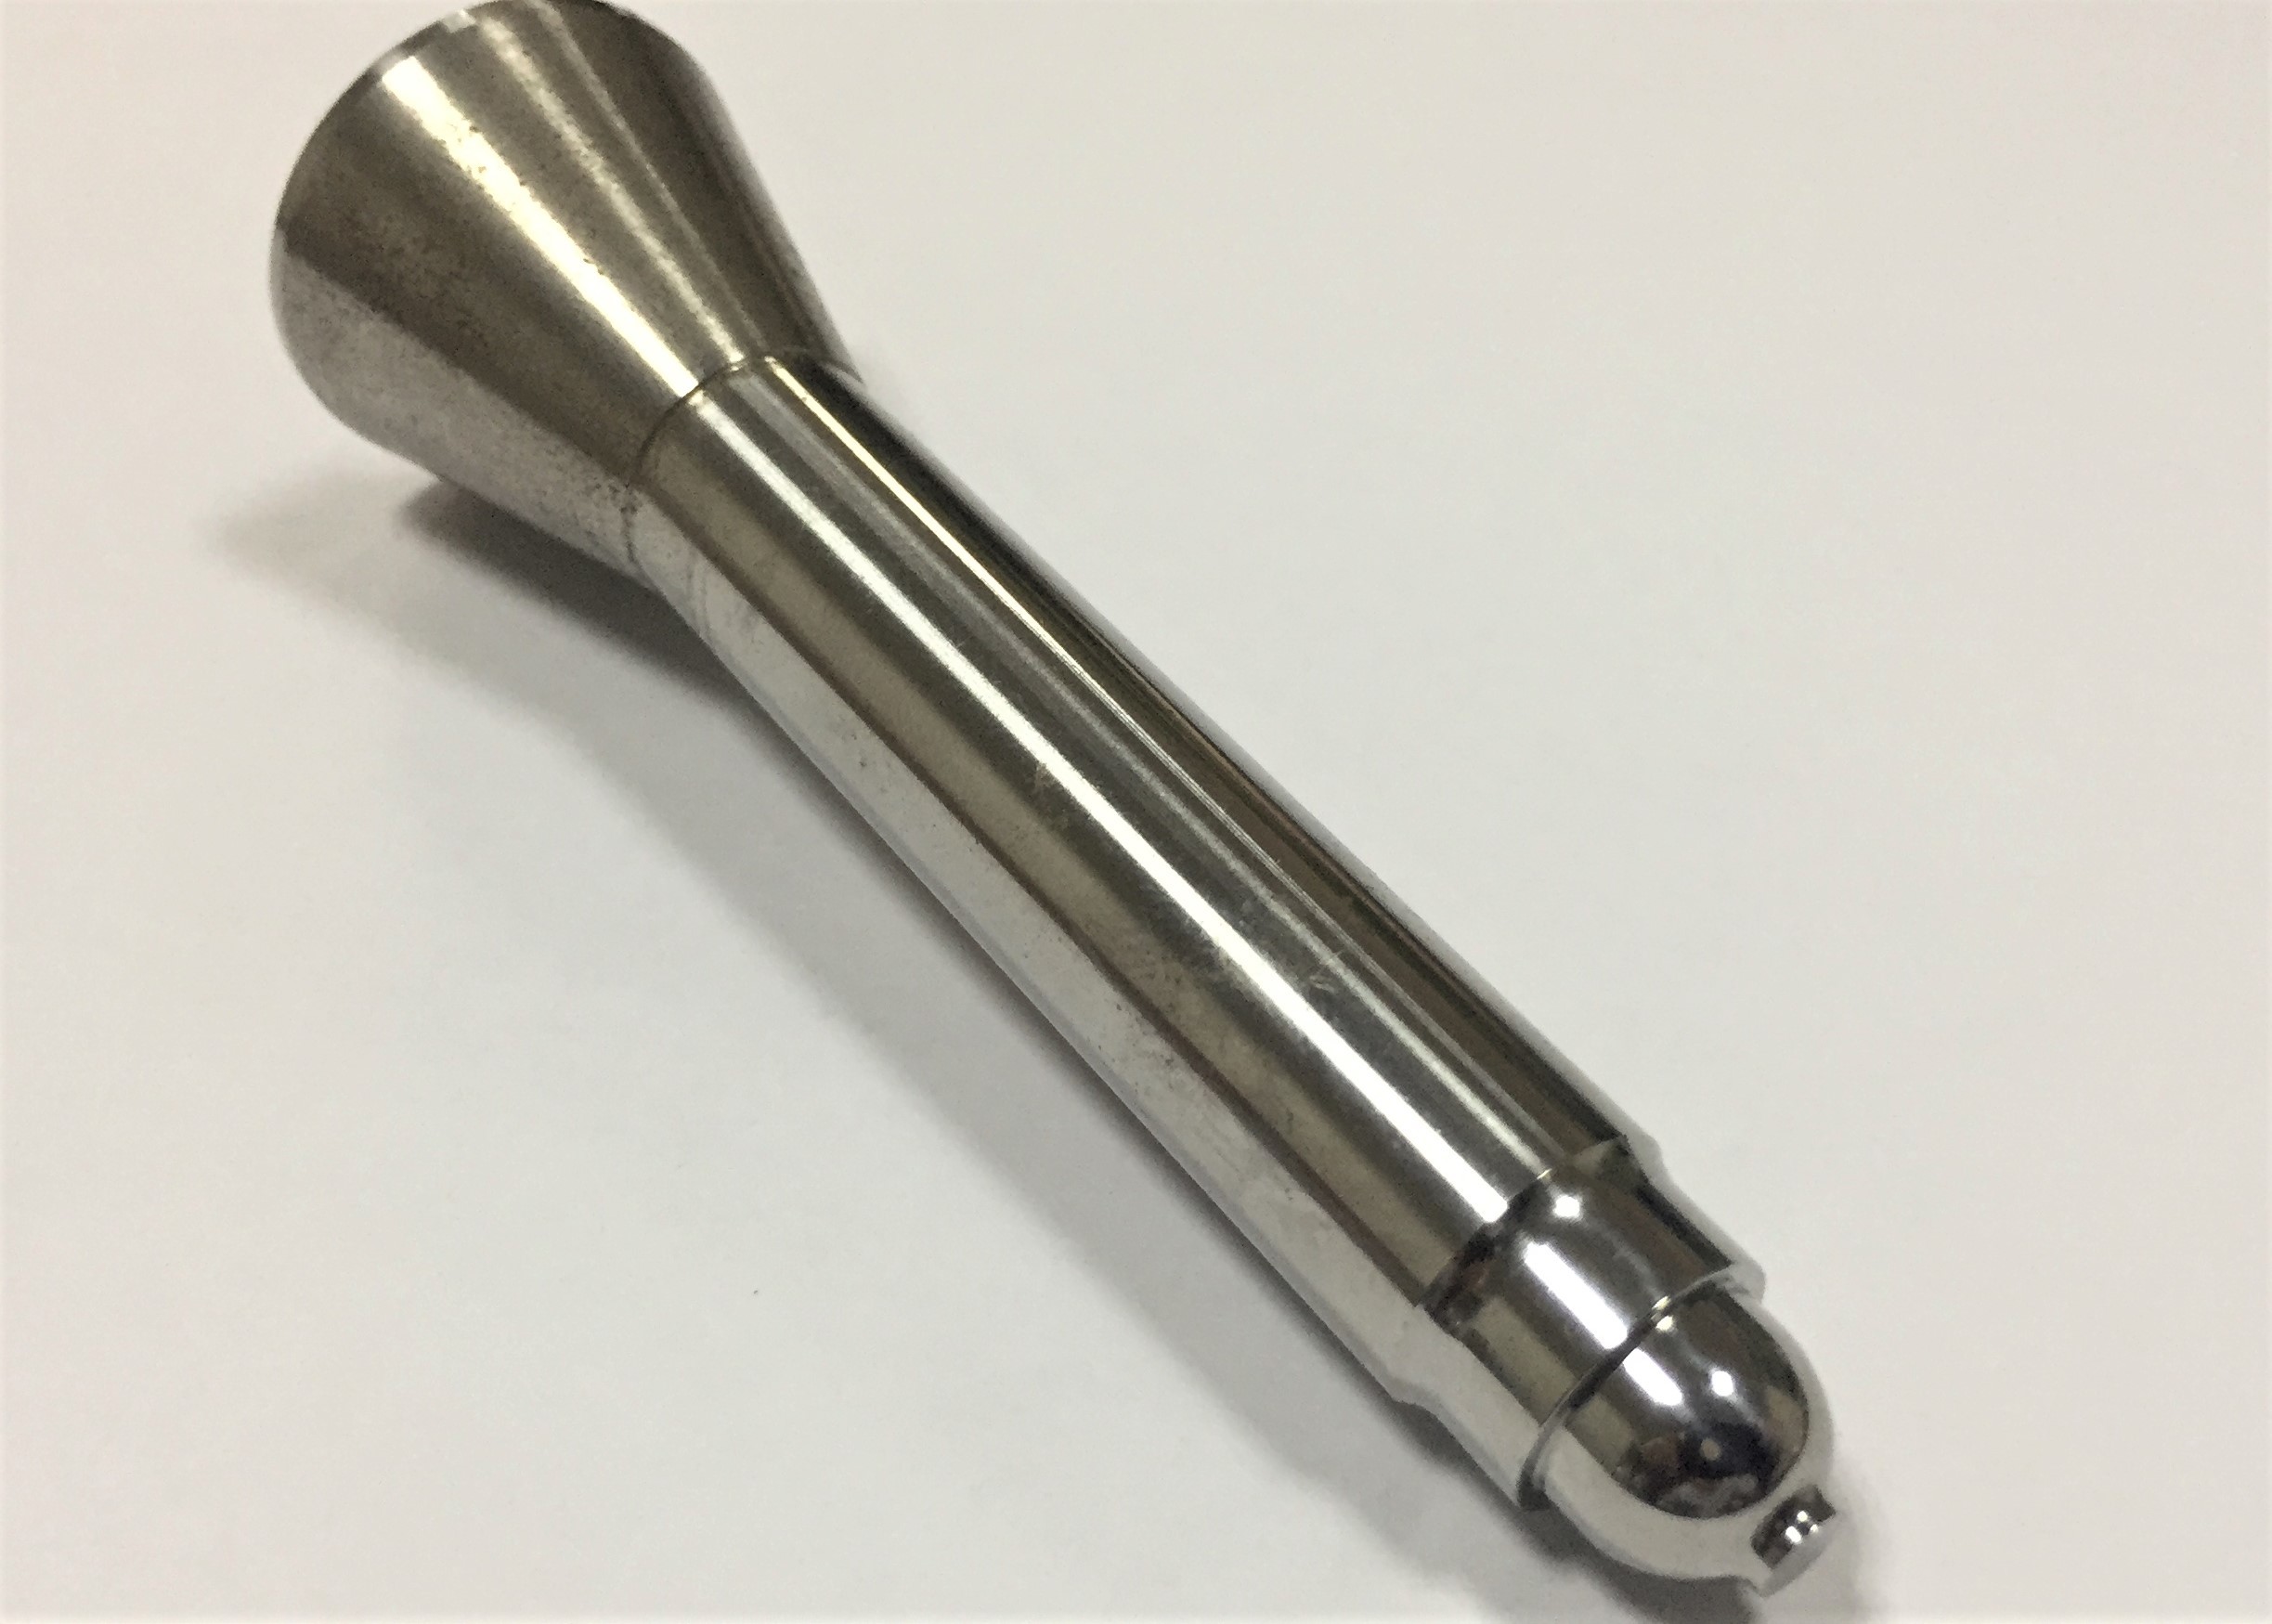 Wholesale Stainless Steel Core Pin Injection Molding Aluminium Harden Core Pin Insert For Pen Mold from china suppliers